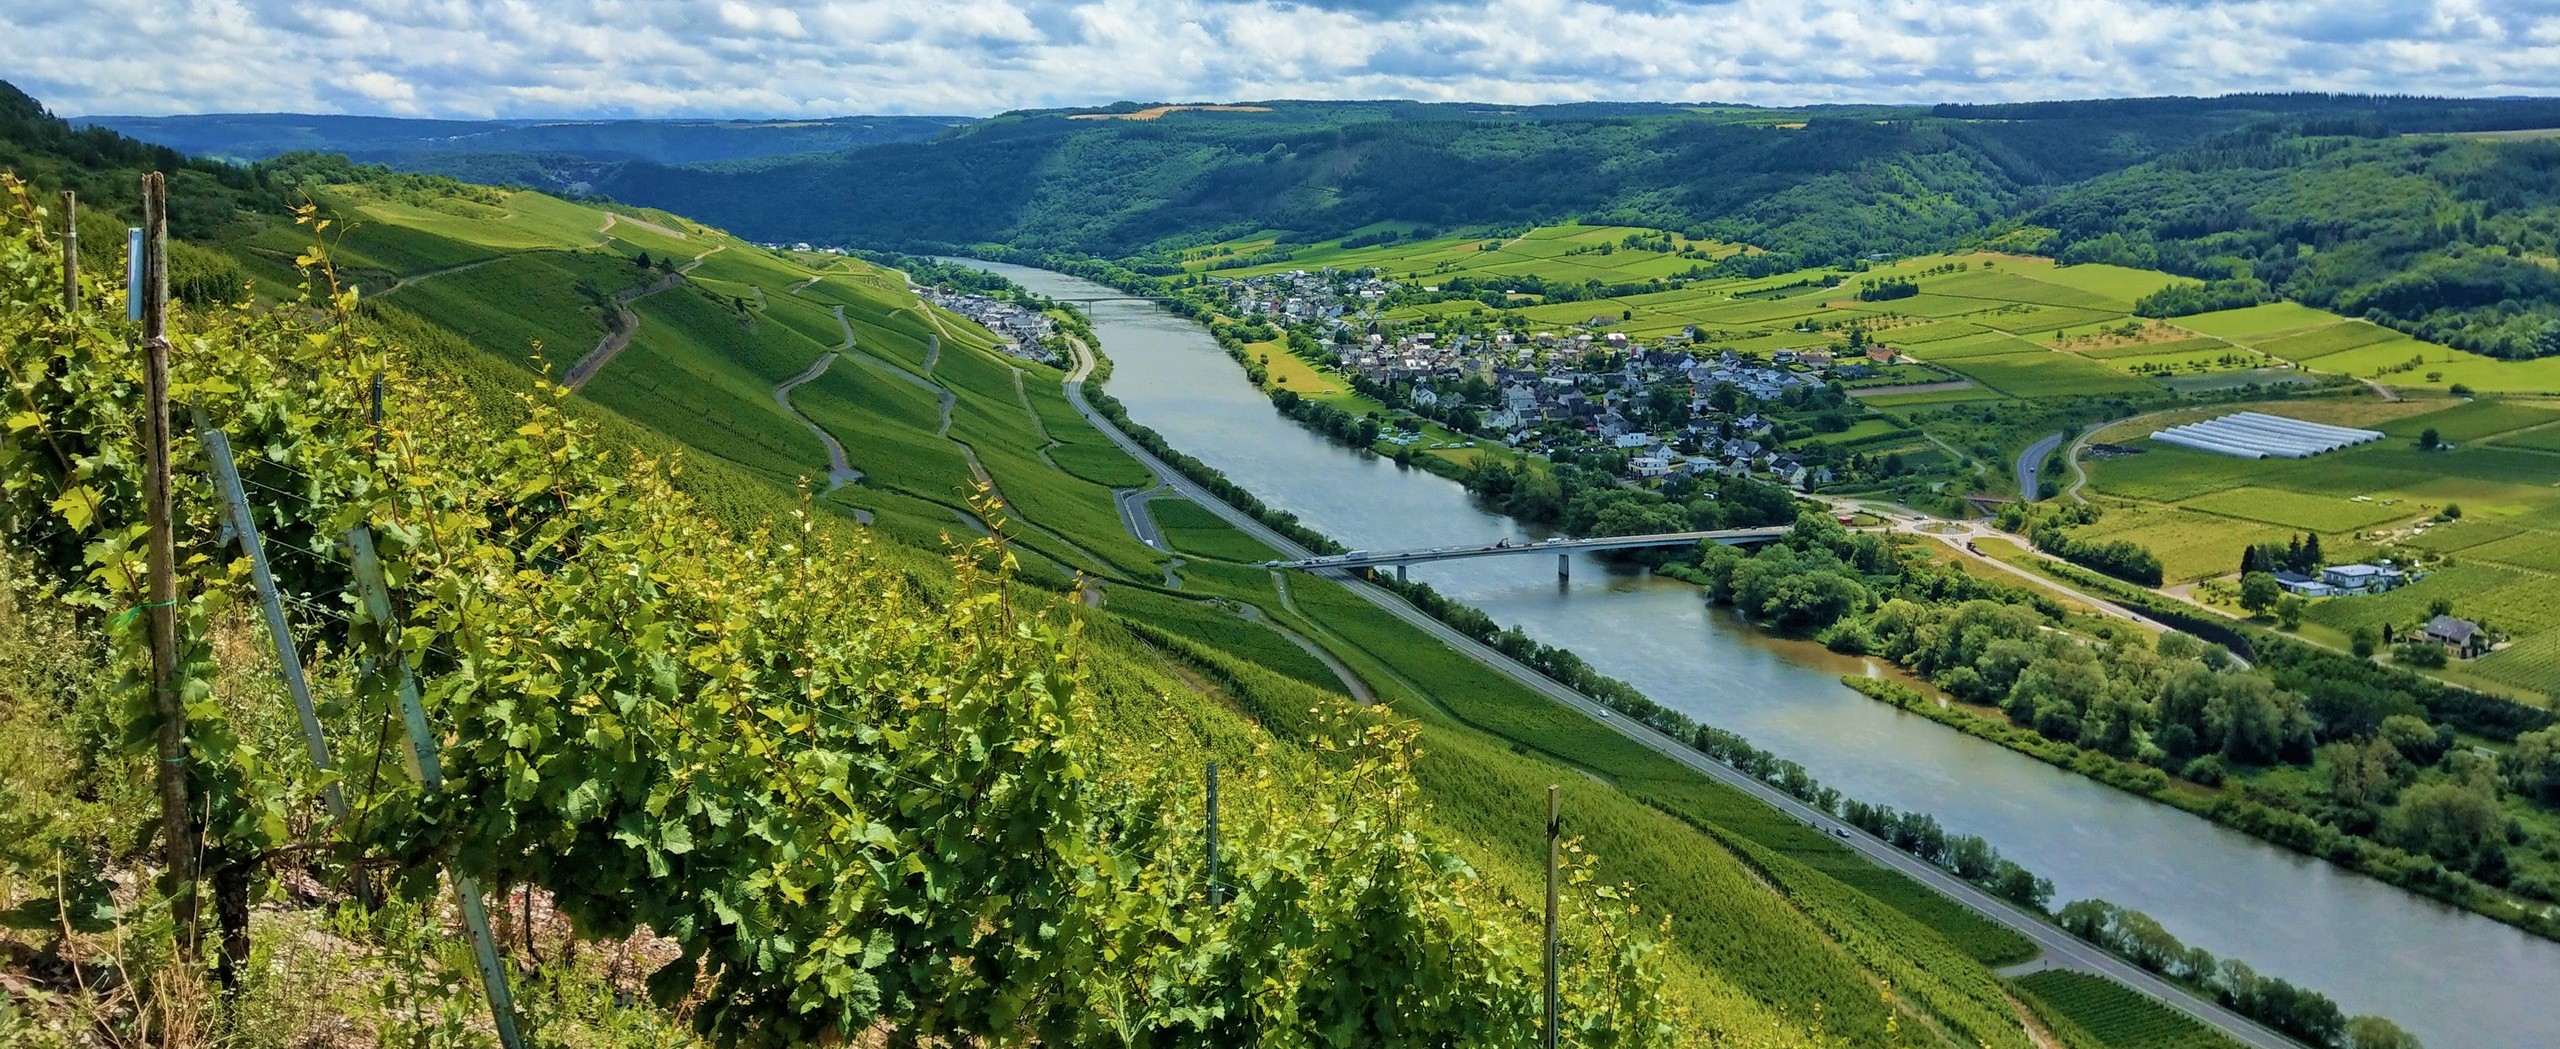 Best of Moselle Trail